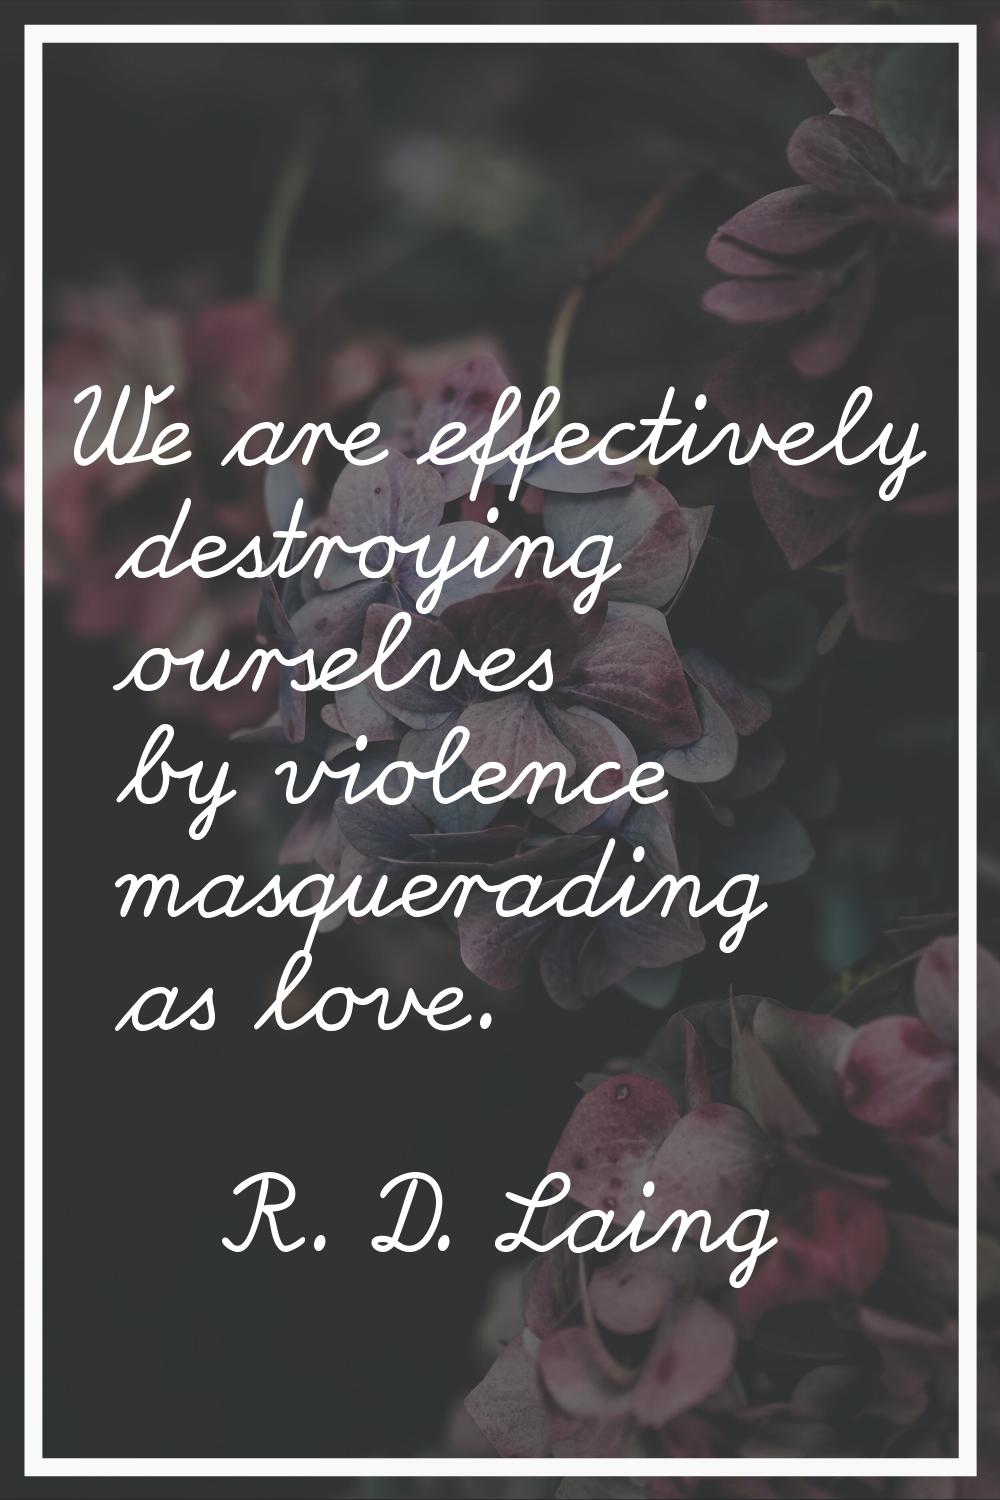 We are effectively destroying ourselves by violence masquerading as love.